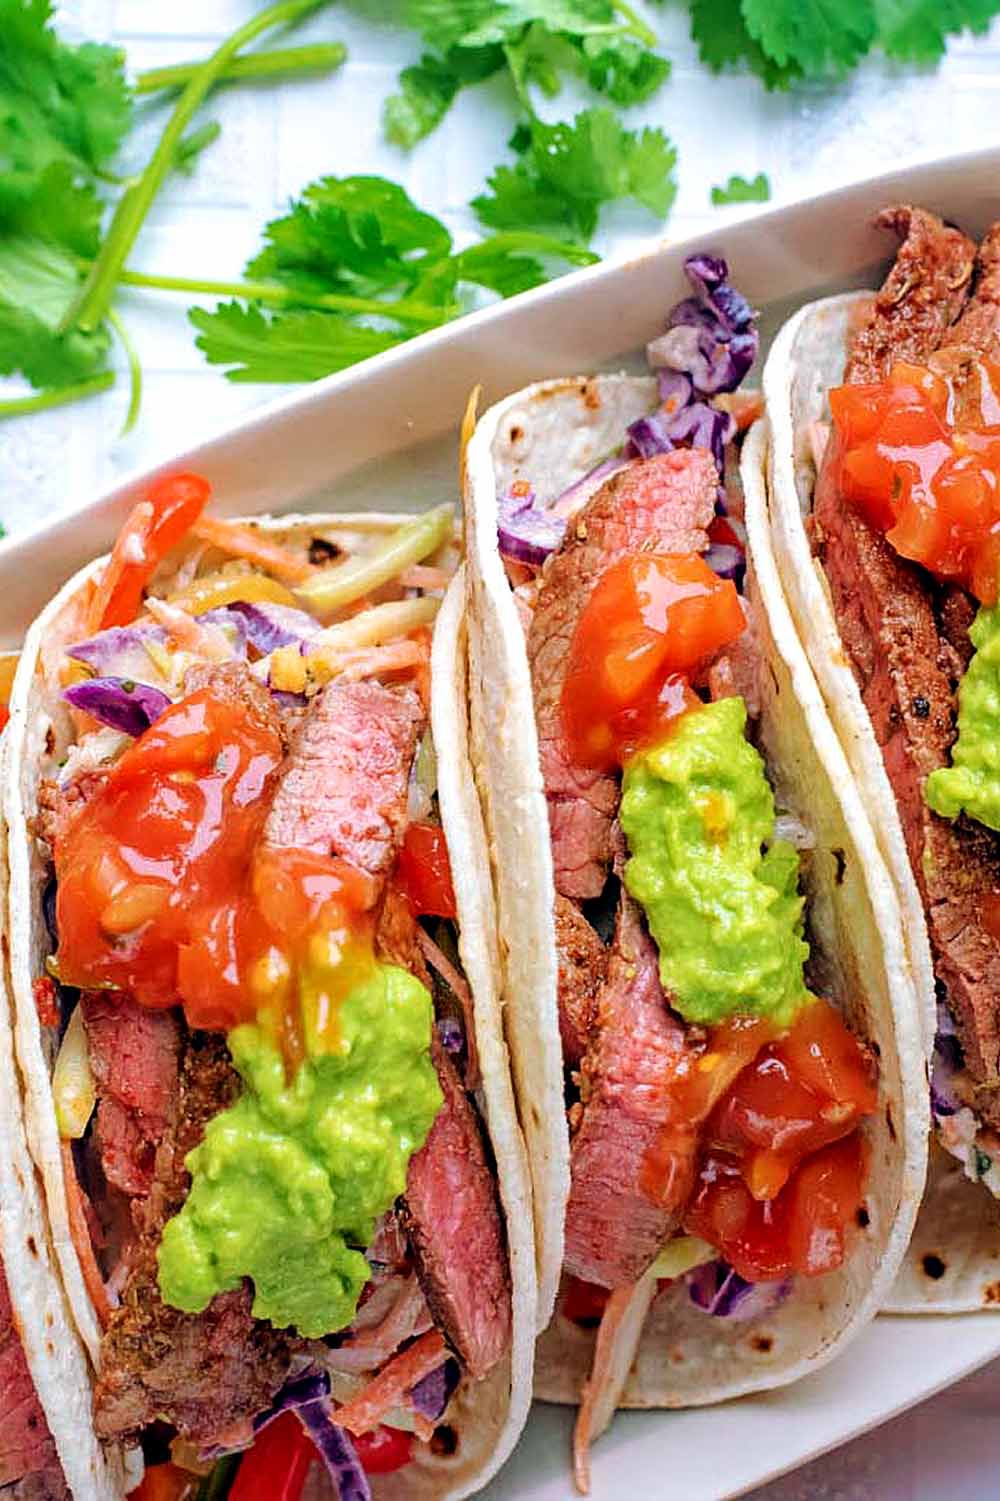 Steak tacos topped with salsa and guacamole.